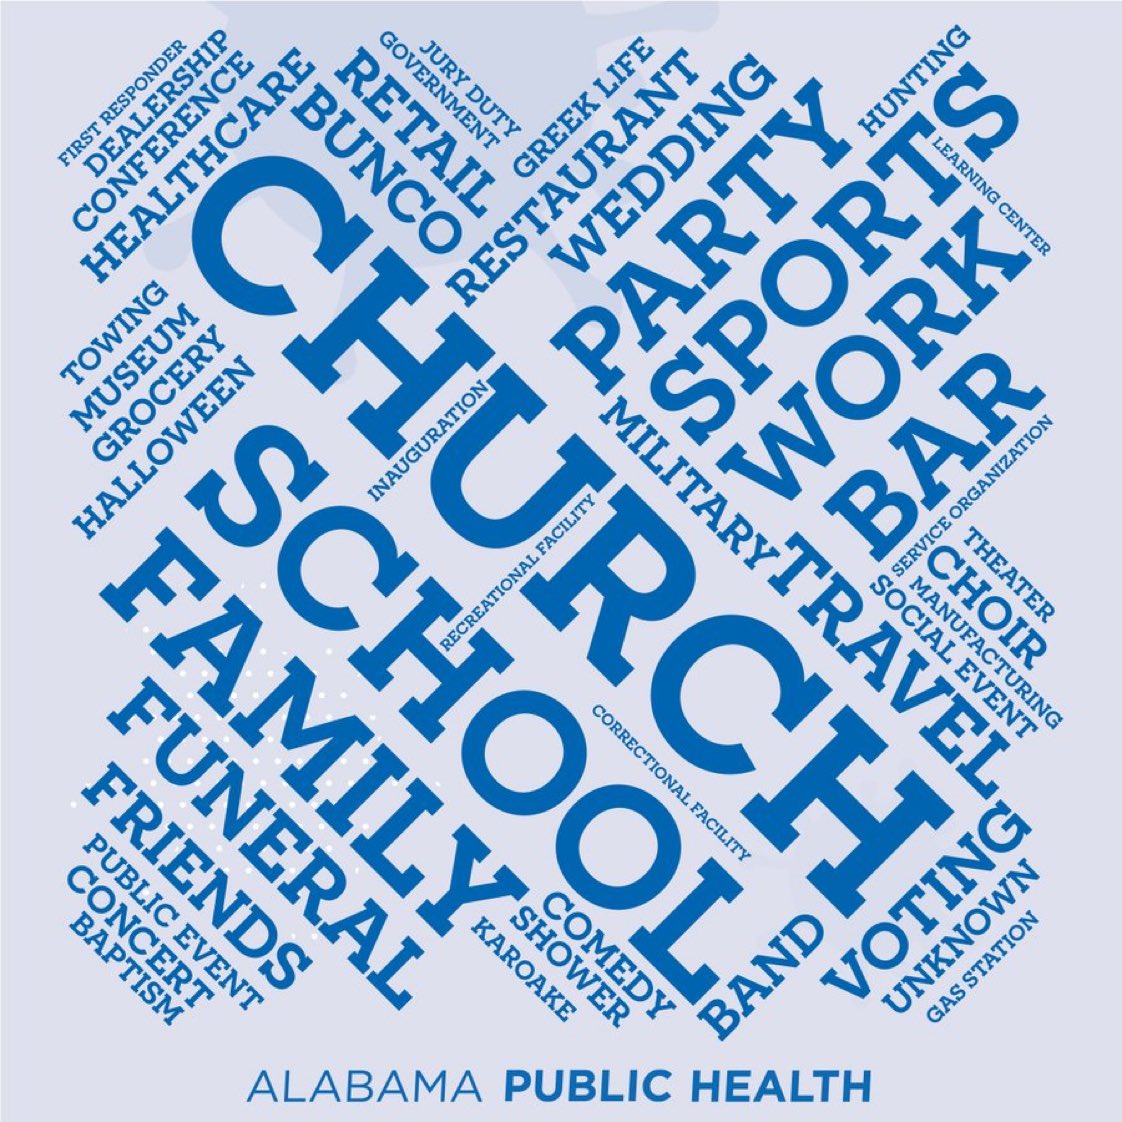 4) NC wasn’t the only places where churches have appeared a lot. Here is a word cloud of places infected individuals have been recently according to  @ALPublicHealth. Word size ~ proportional to frequency.